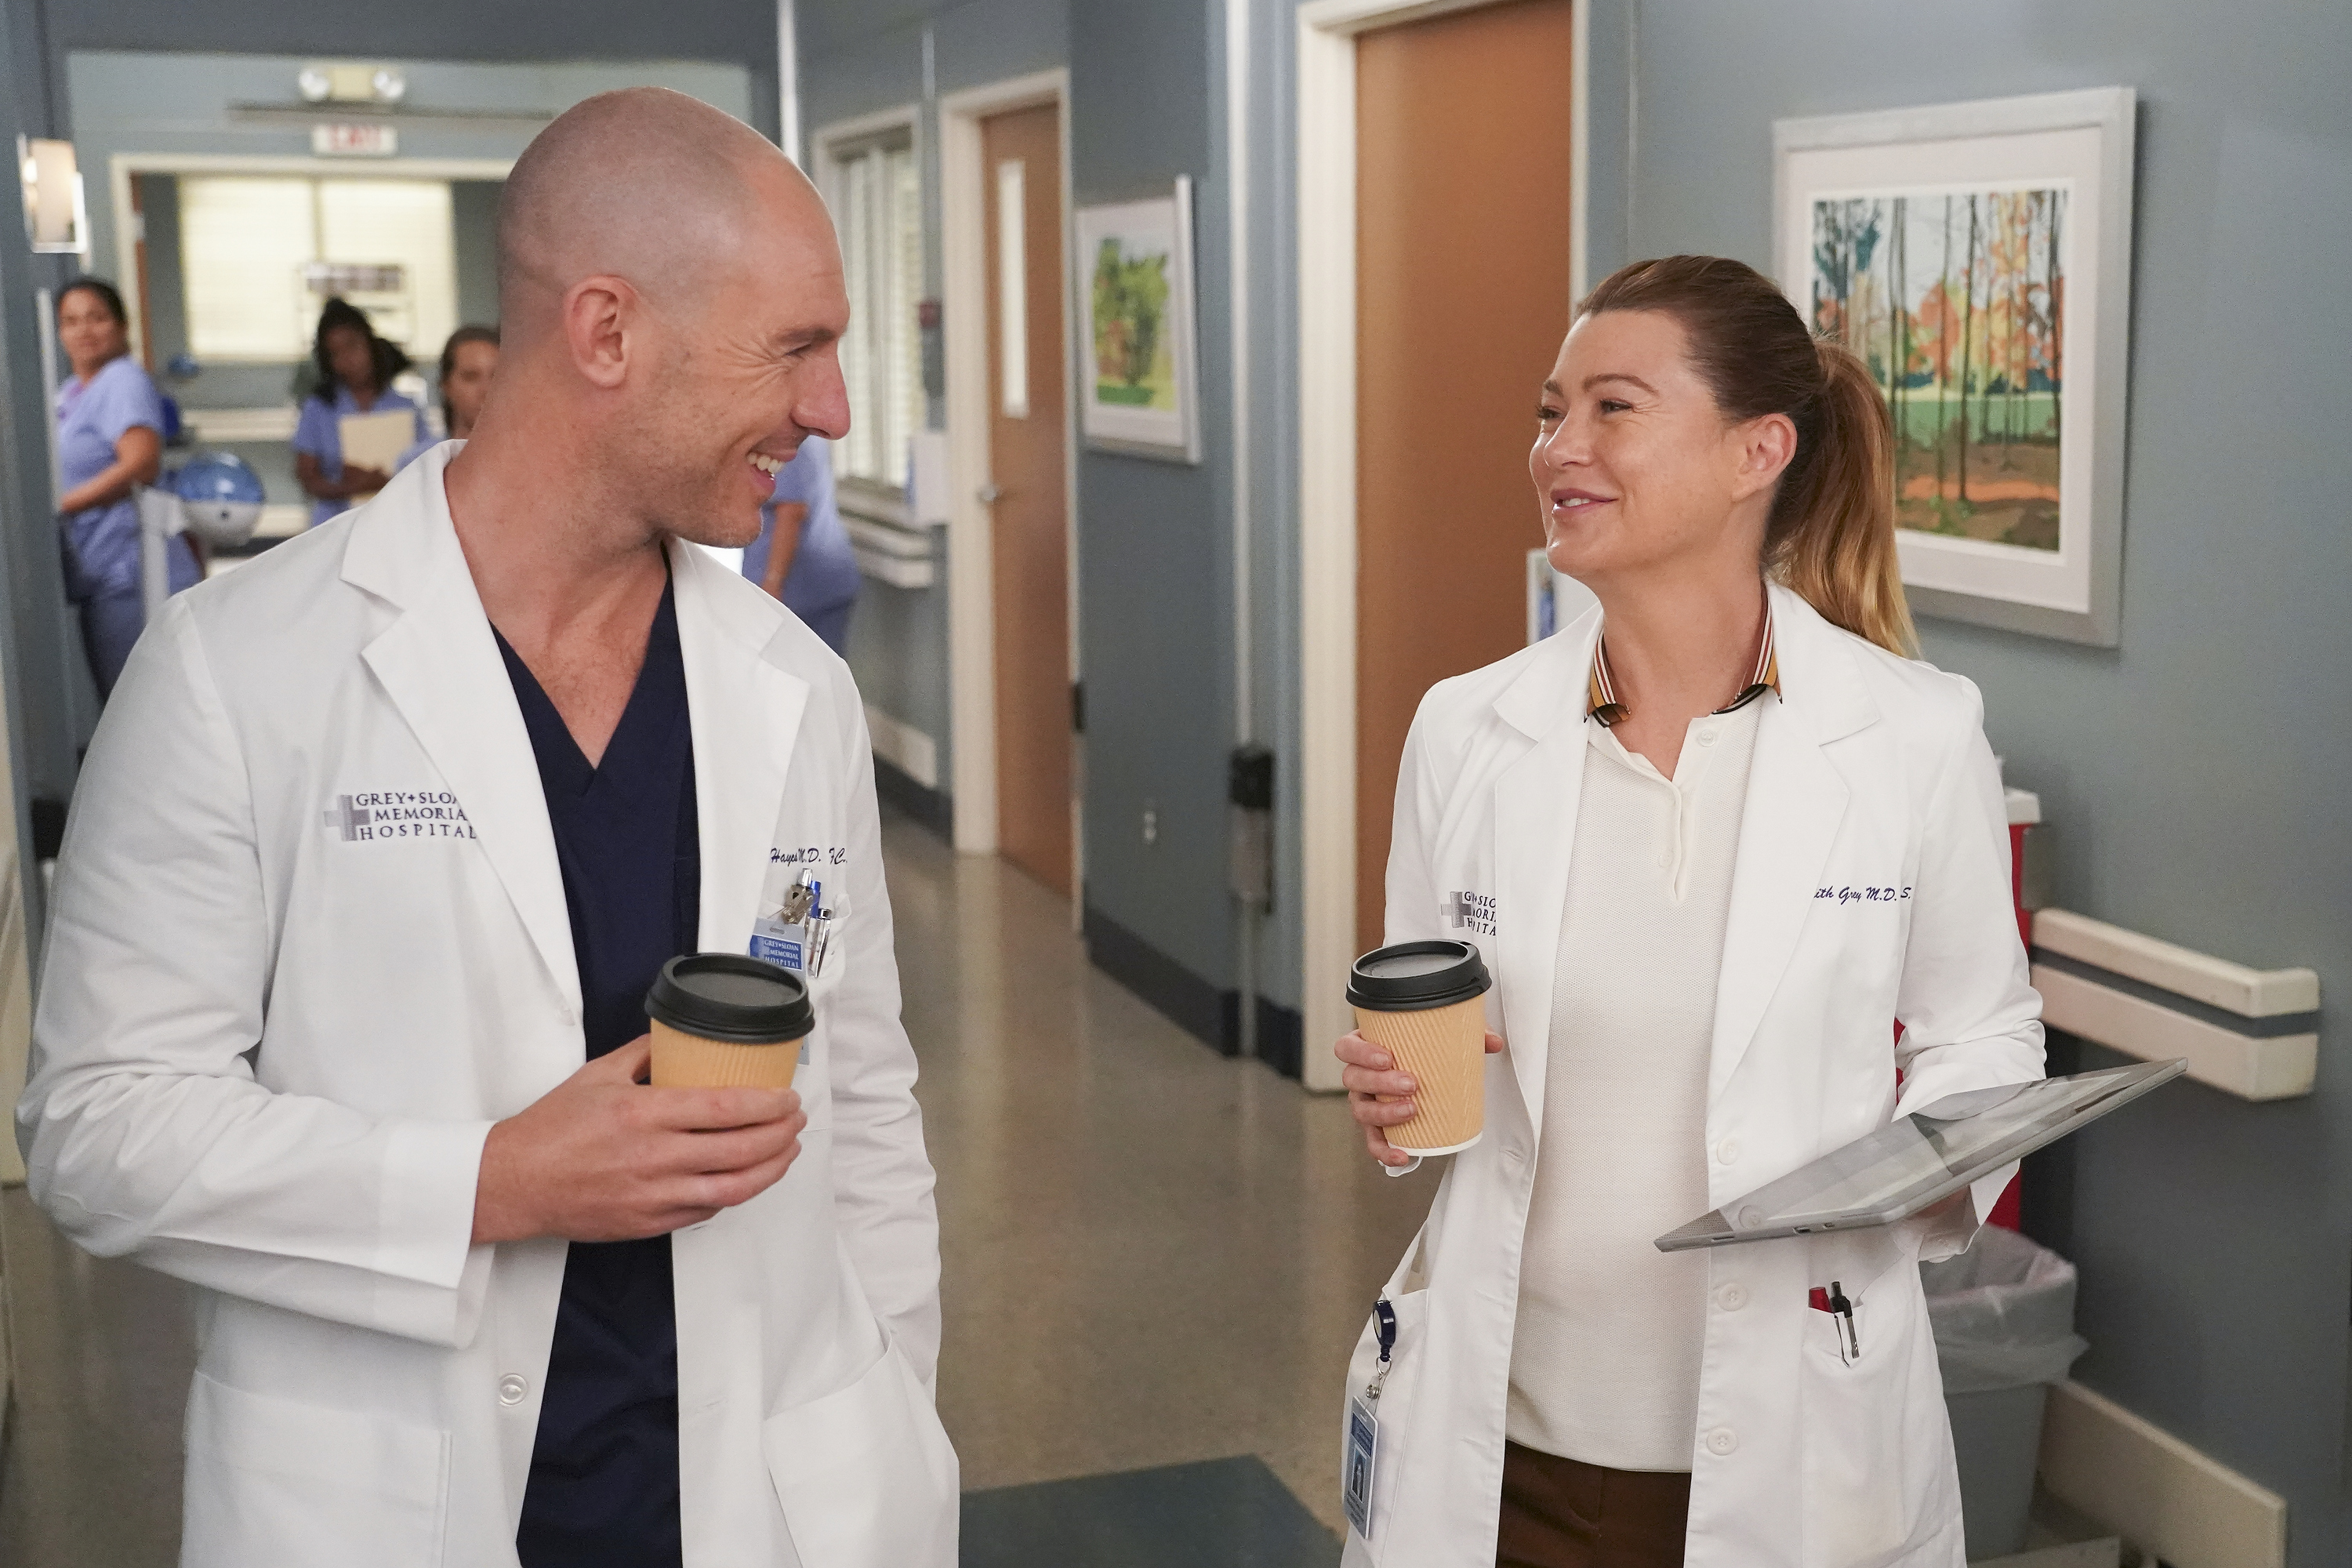 Greys Anatomy season 18 premiere, episode 1 (93021): How to watch,  livestream, time, date, channel - pennlive.com